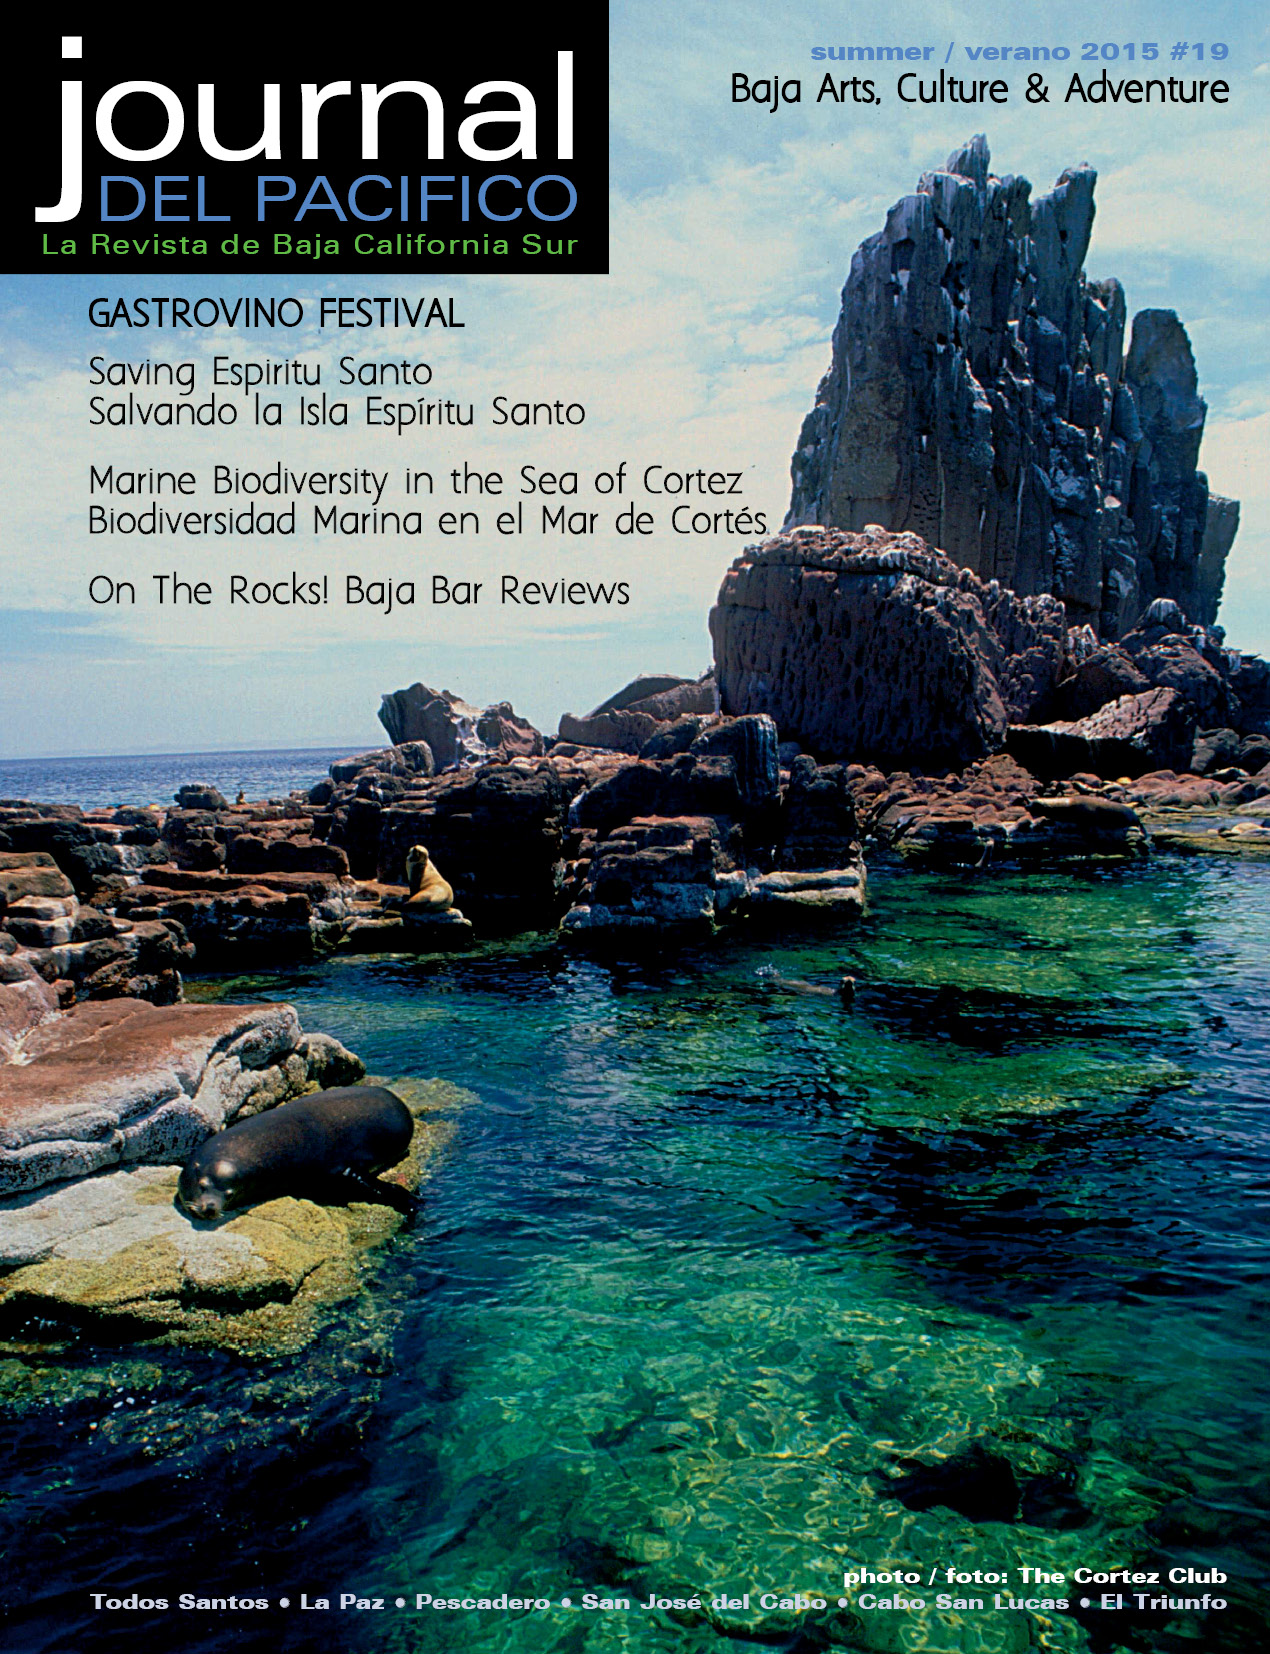 Spring 2015 Issue of Journal del Pacifico